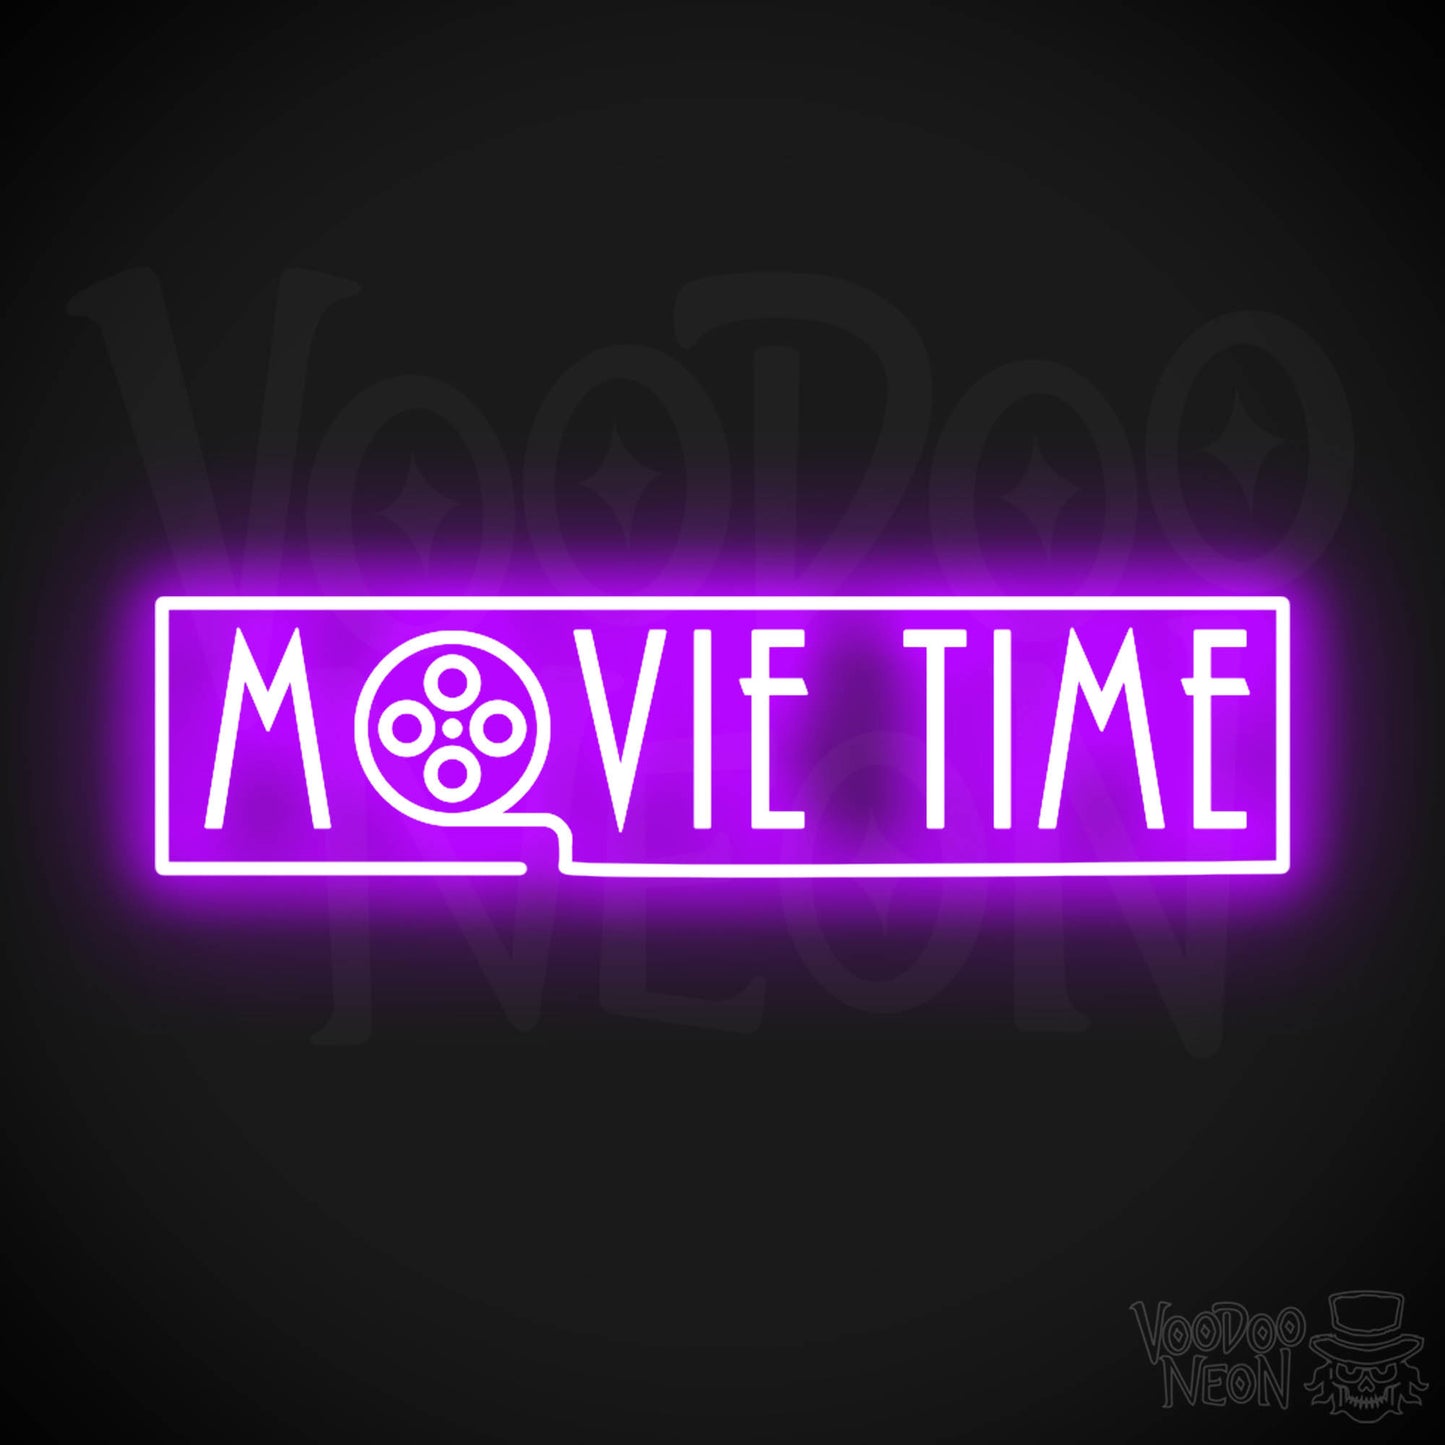 Movie Time Neon Sign - Neon Movie Time Sign - Color Purple